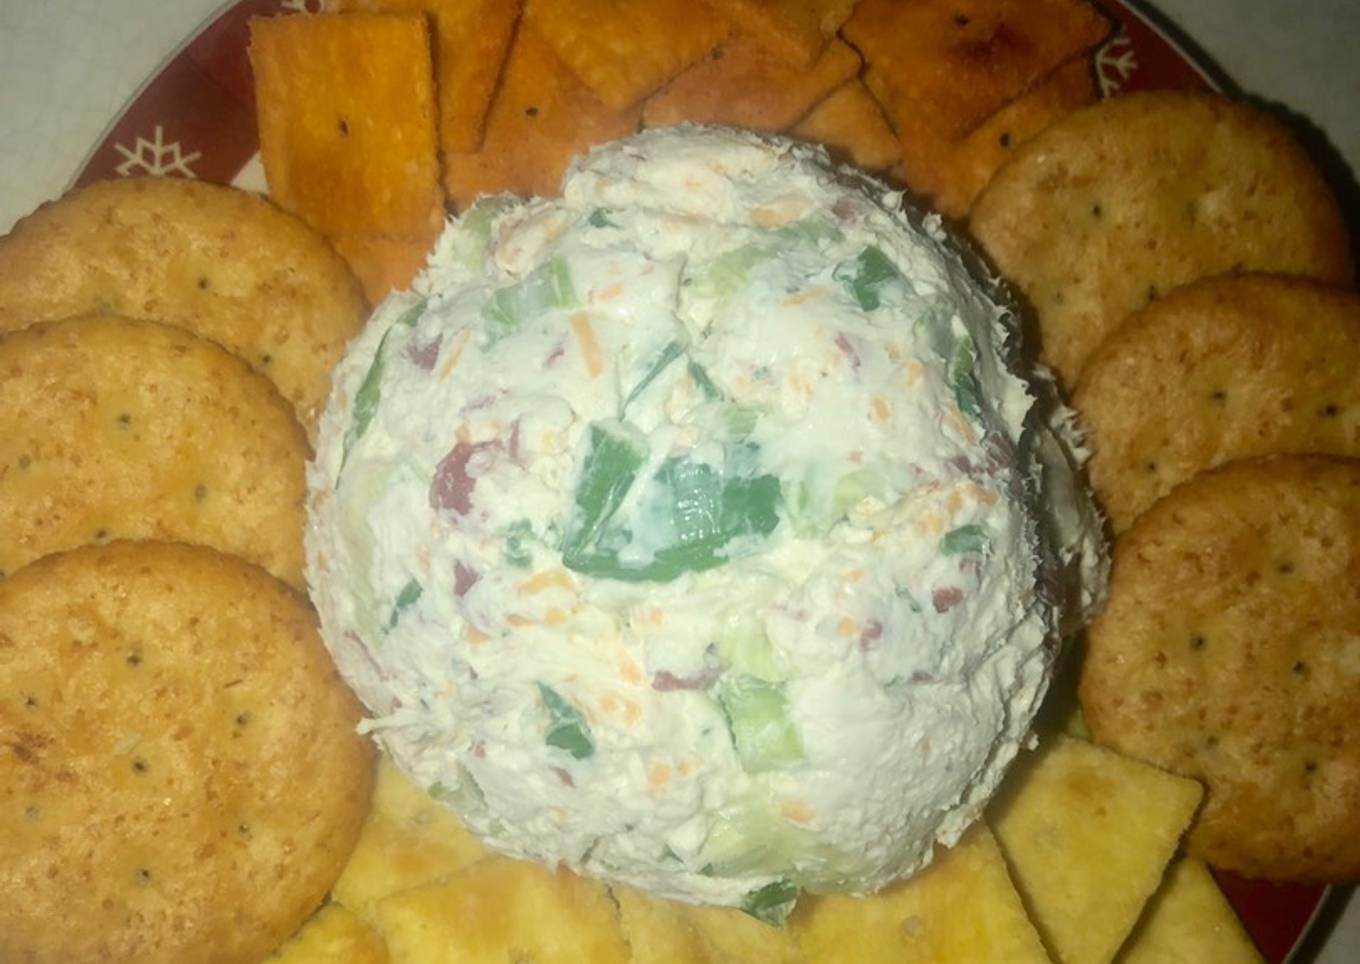 Dried beef & green onion ranch cheese ball